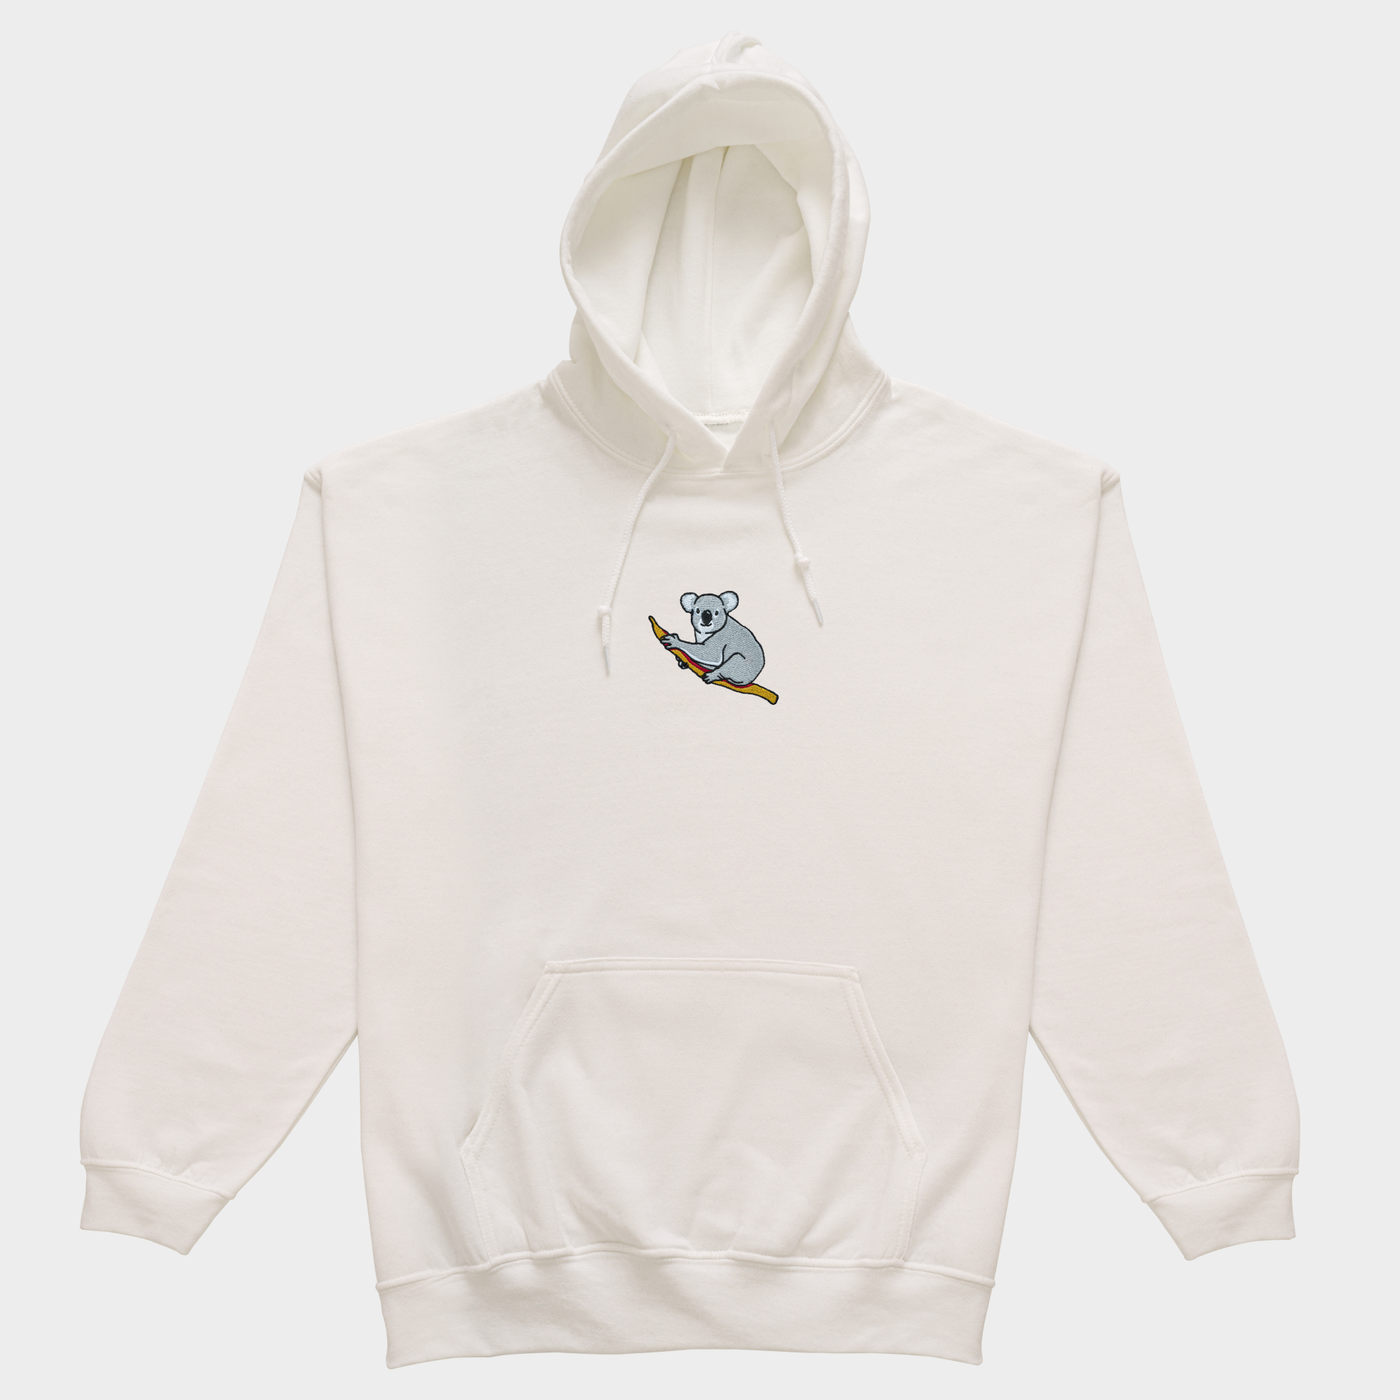 Bobby's Planet Women's Embroidered Koala Hoodie from Australia Down Under Animals Collection in White Color#color_white